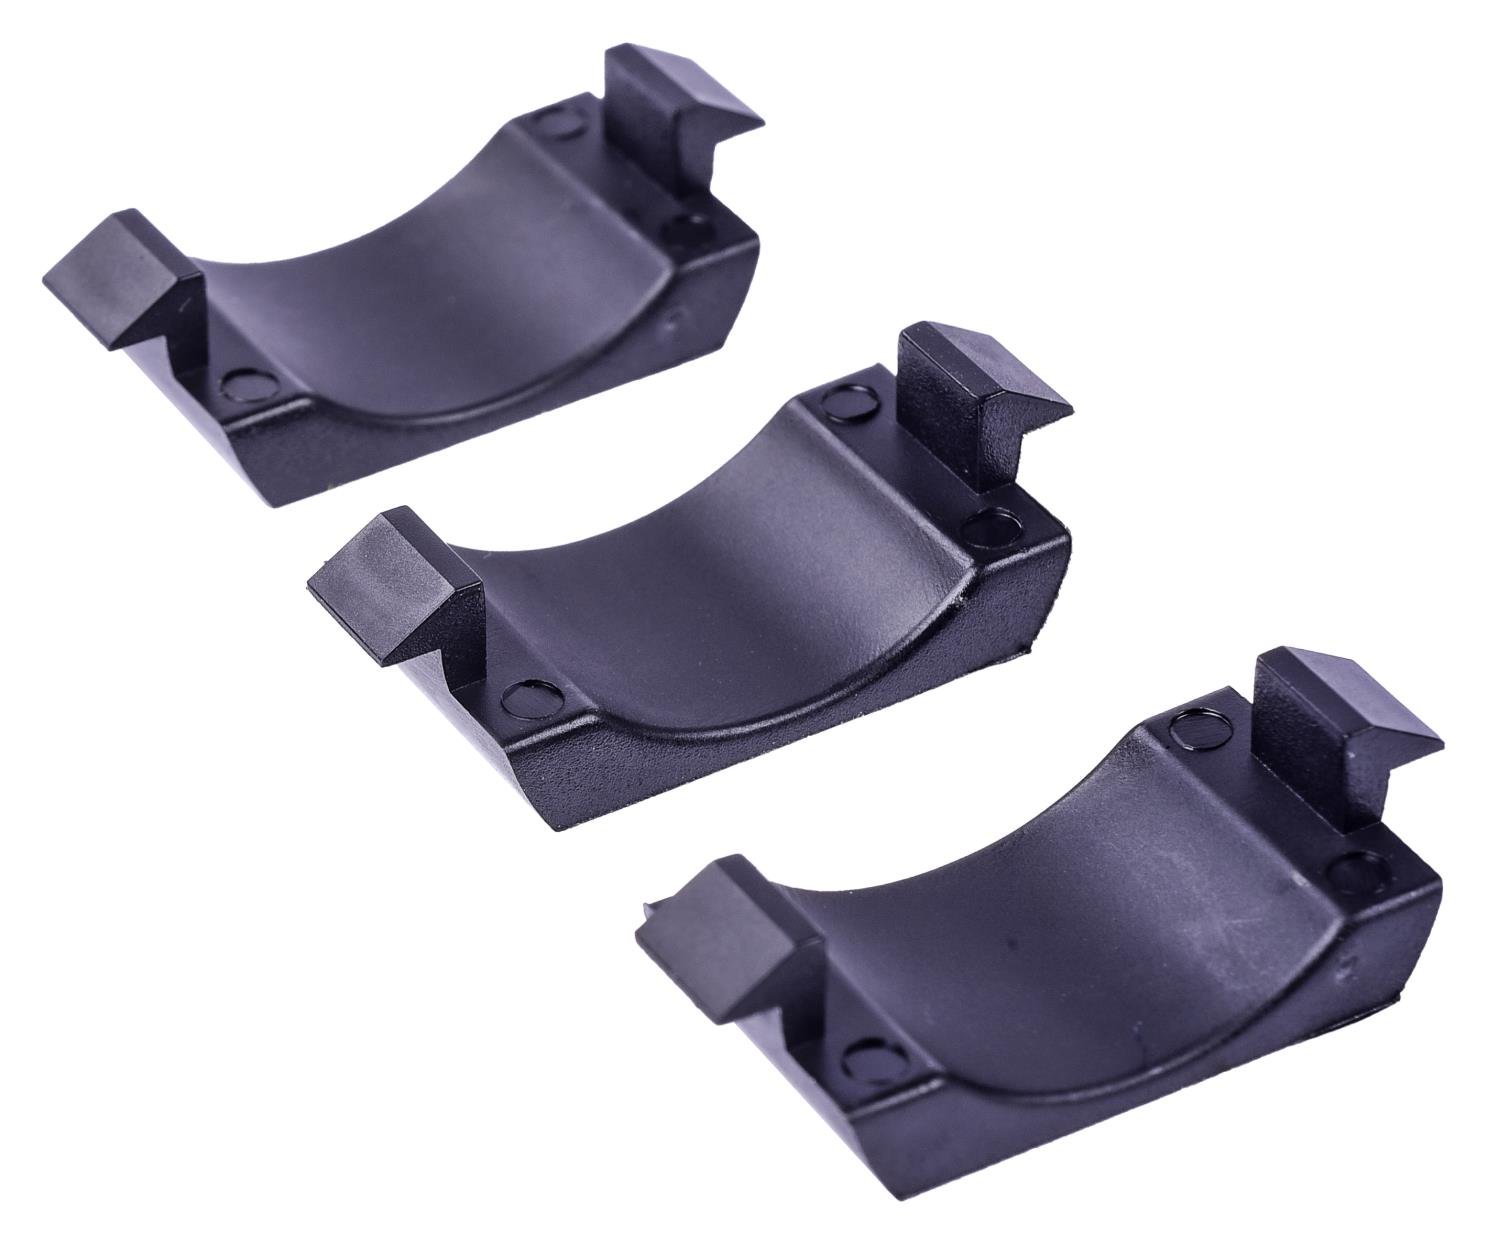 JEGS 79321: Cowl Induction Flapper Retainers 1969 Chevy Camaro  1970-1972 Chevy Chevelle/El Camino 1973-1976 Chevy Corvette OEM-Style  Replacement Injection Molded ABS Plastic Black Finish Set of JEGS